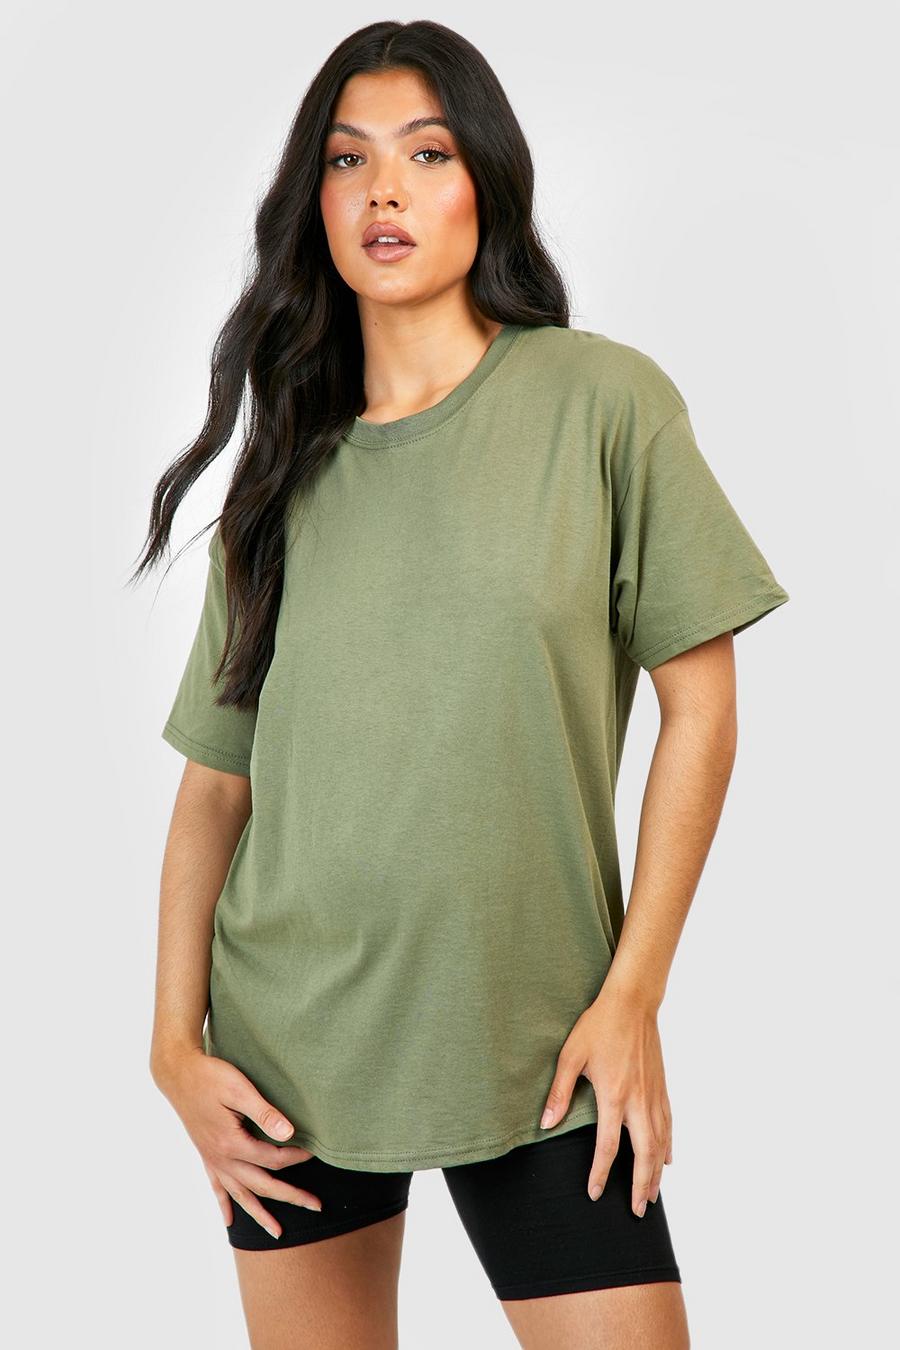 Olive green Maternity Cotton T-shirt